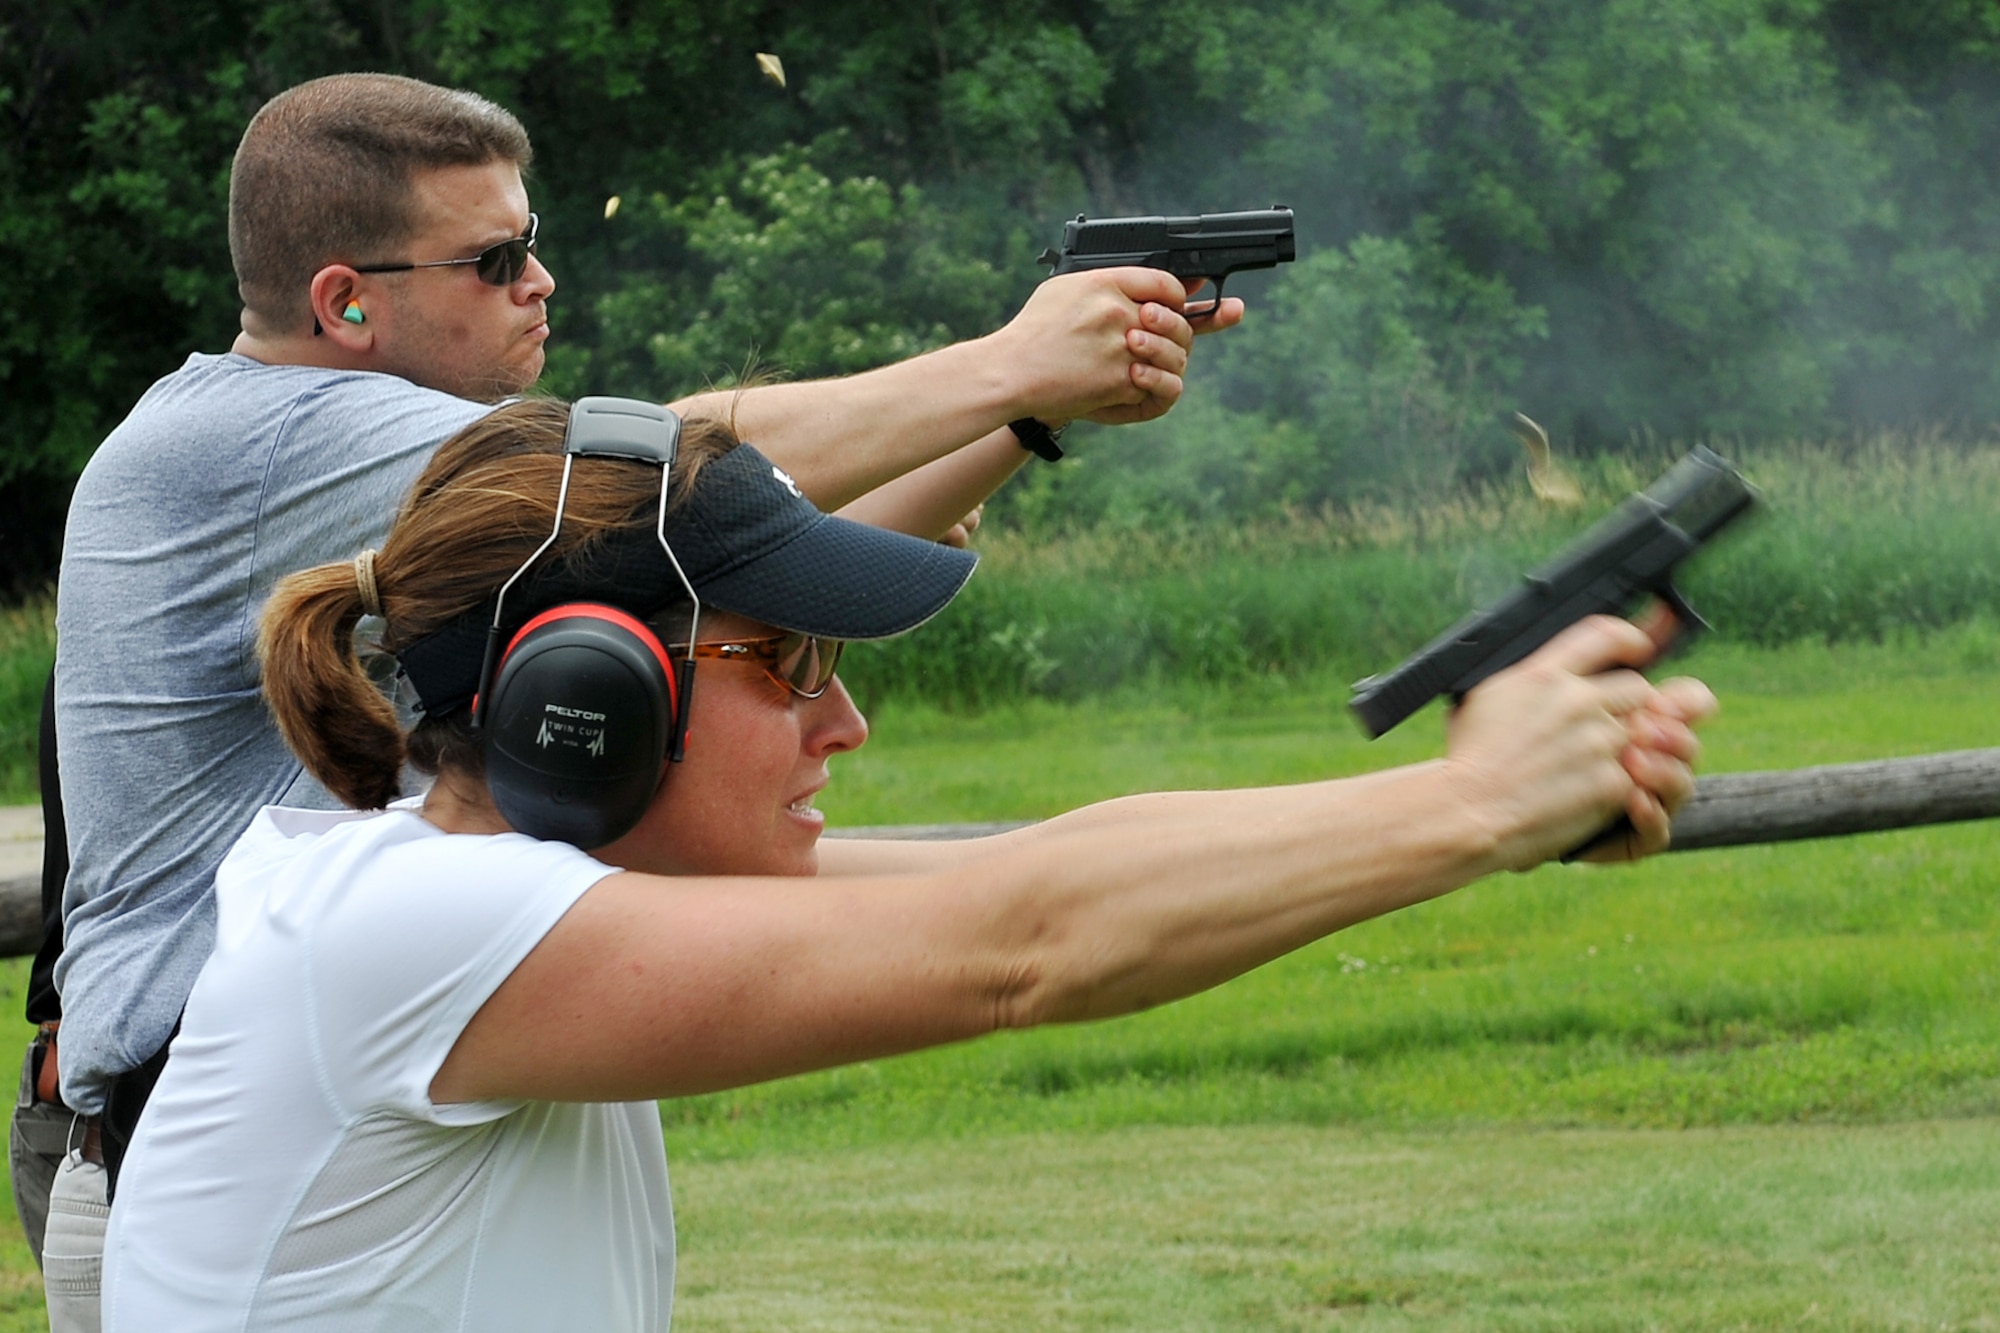 An FBI Agent shoots her weapon during the Air Force Office of Special Investigations pistol competition held at the Bellevue Rod and Gun Club in Bellevue, Neb. June 17. The Agent participated in a .6 mile run, shot her weapon from the kneeling position, and also shot at various targets all while being timed. 

U.S. Air Force Photo by Charles Haymond